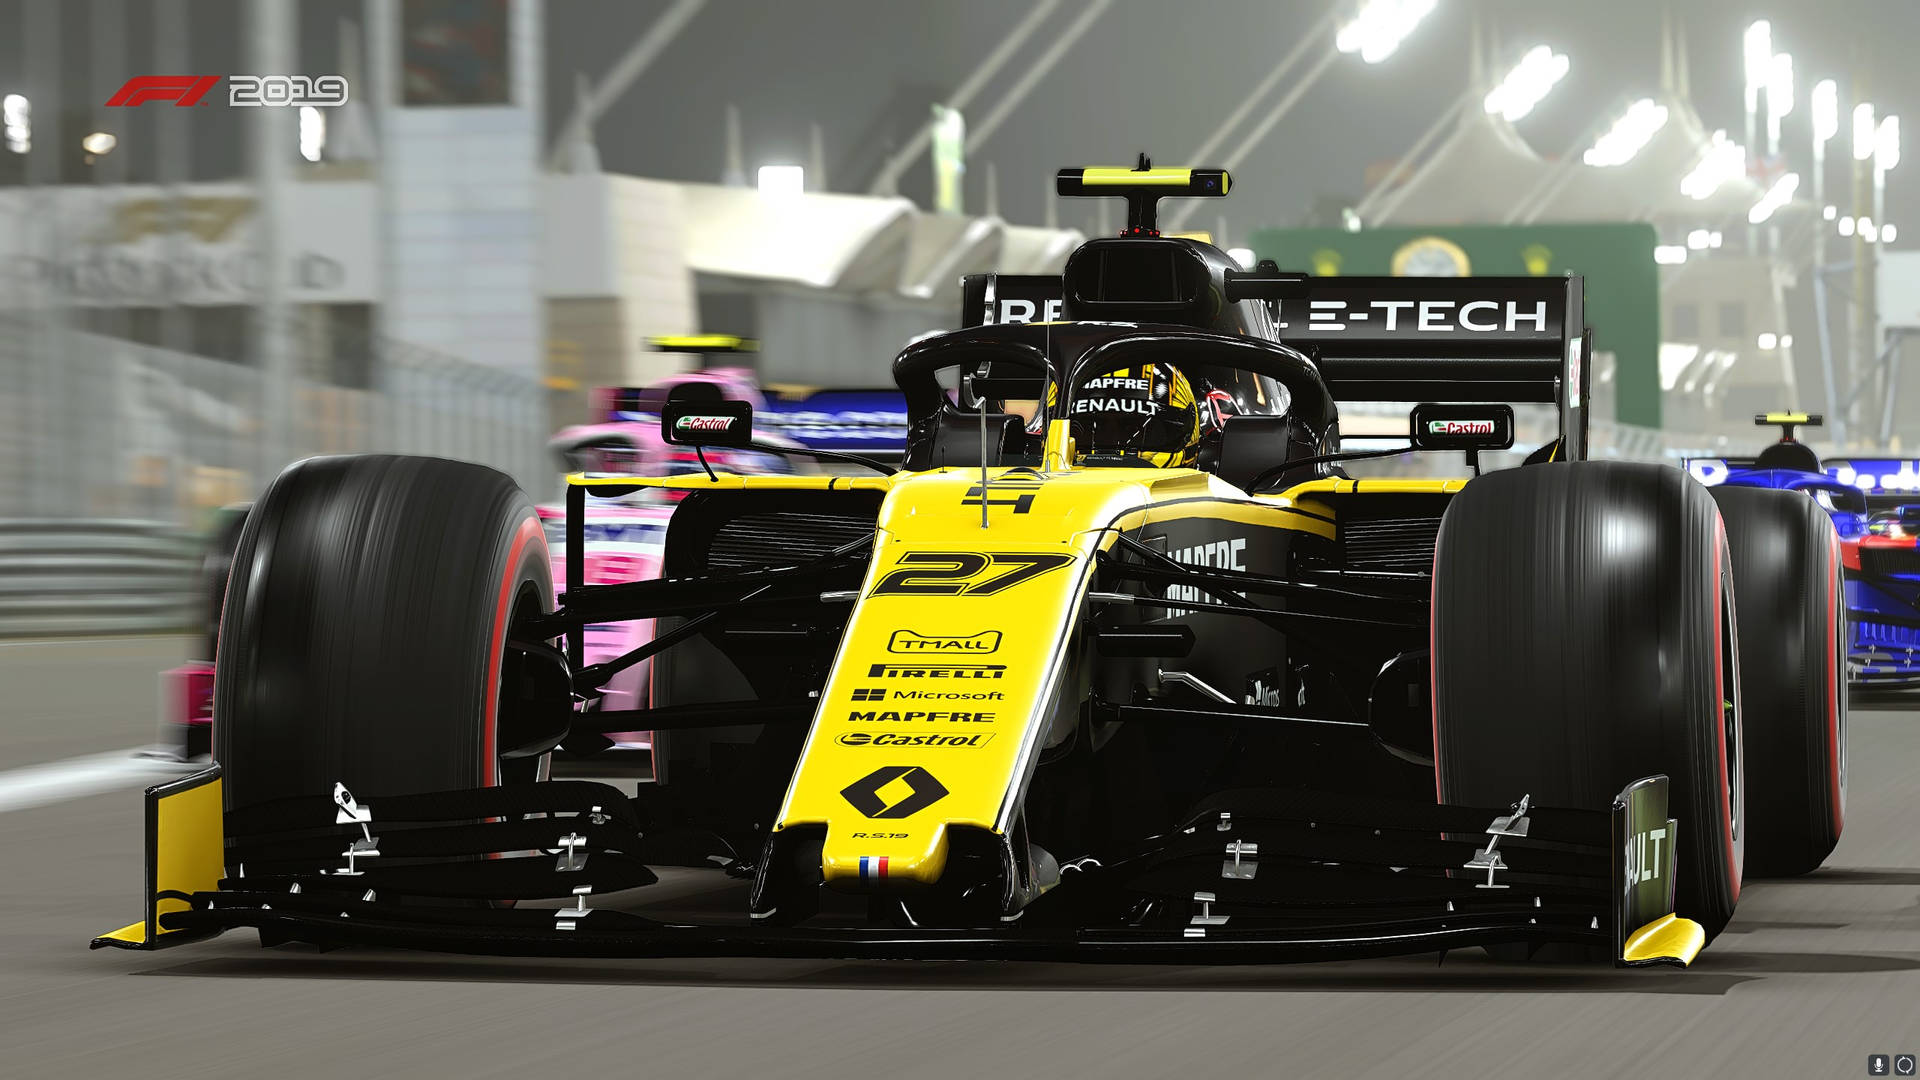 Renault's #27 Car In F1 2019 Background